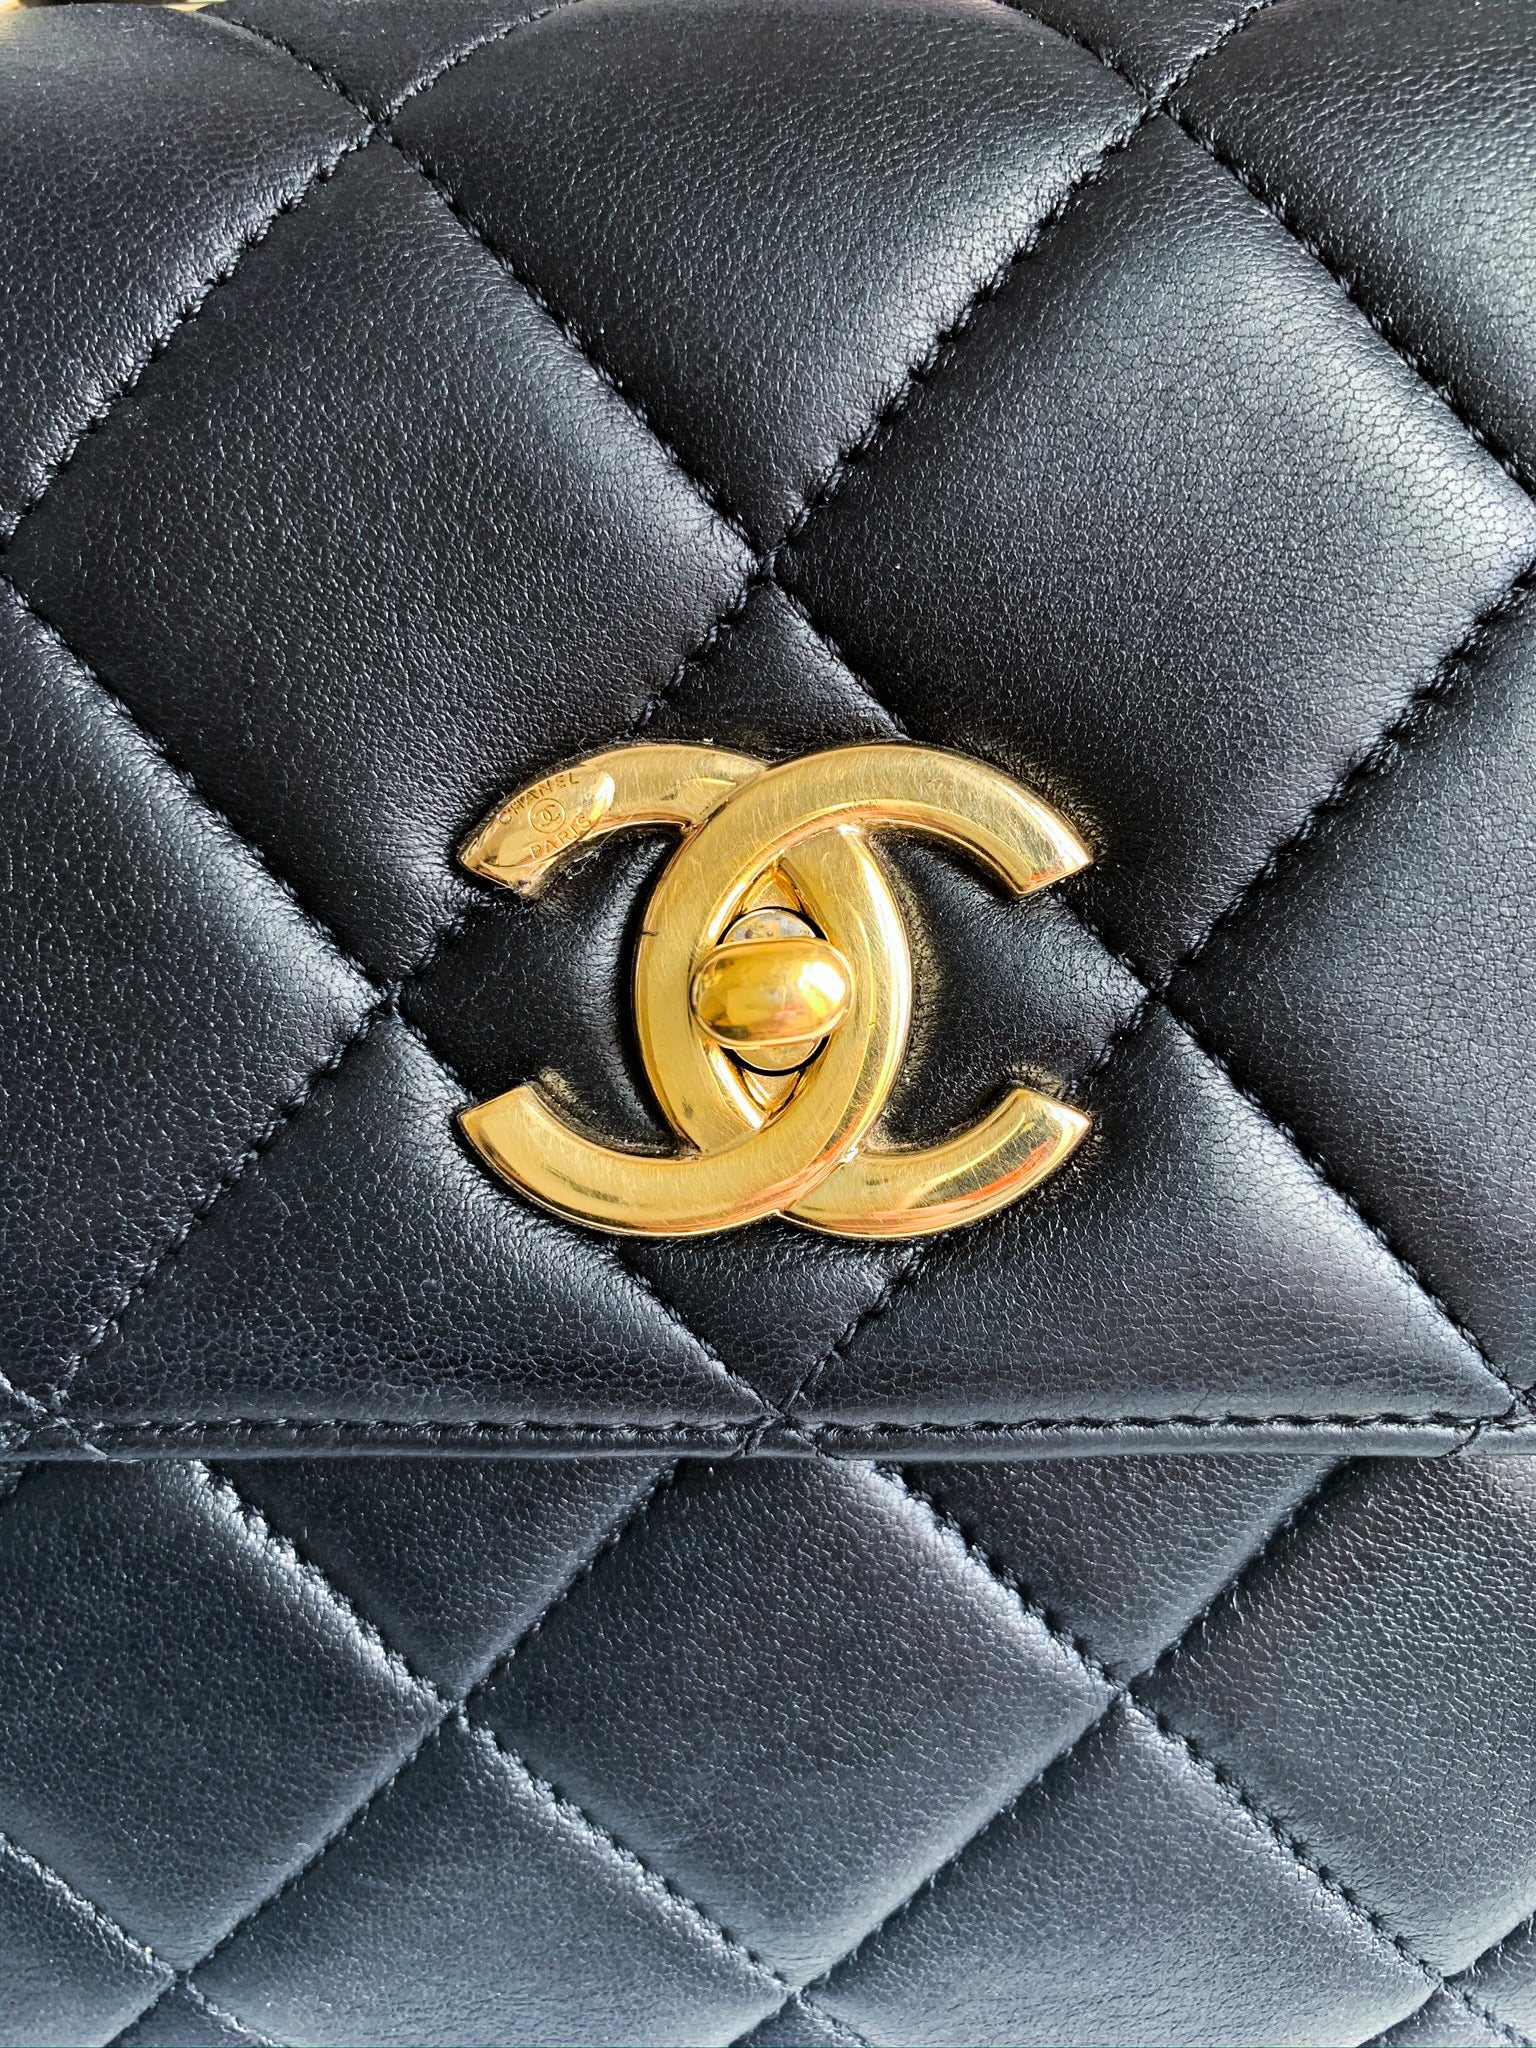 CHANEL Lambskin Quilted Large Trendy CC Bowling Bag Black 732340